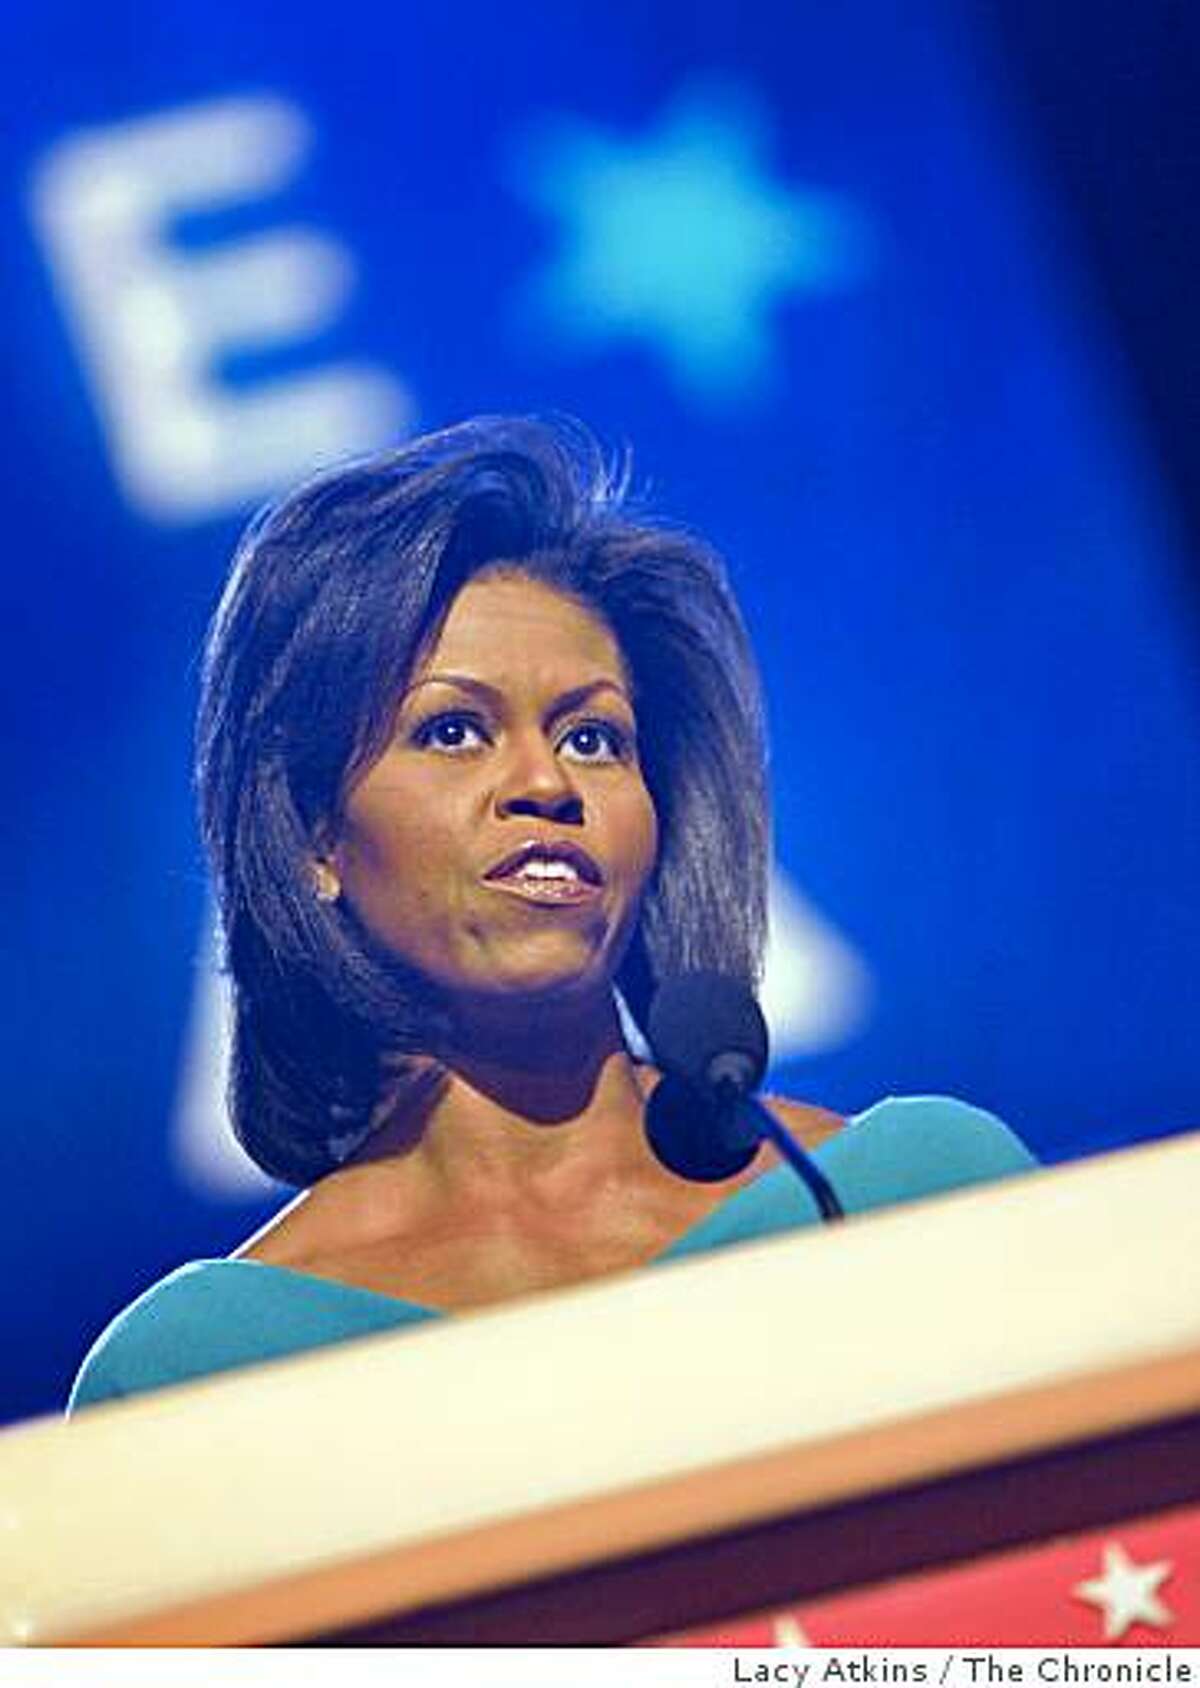 Michelle Obama speaks opening night of the Democratic National Convention, Monday Aug. 25, 2008, in Denver, Colorado.